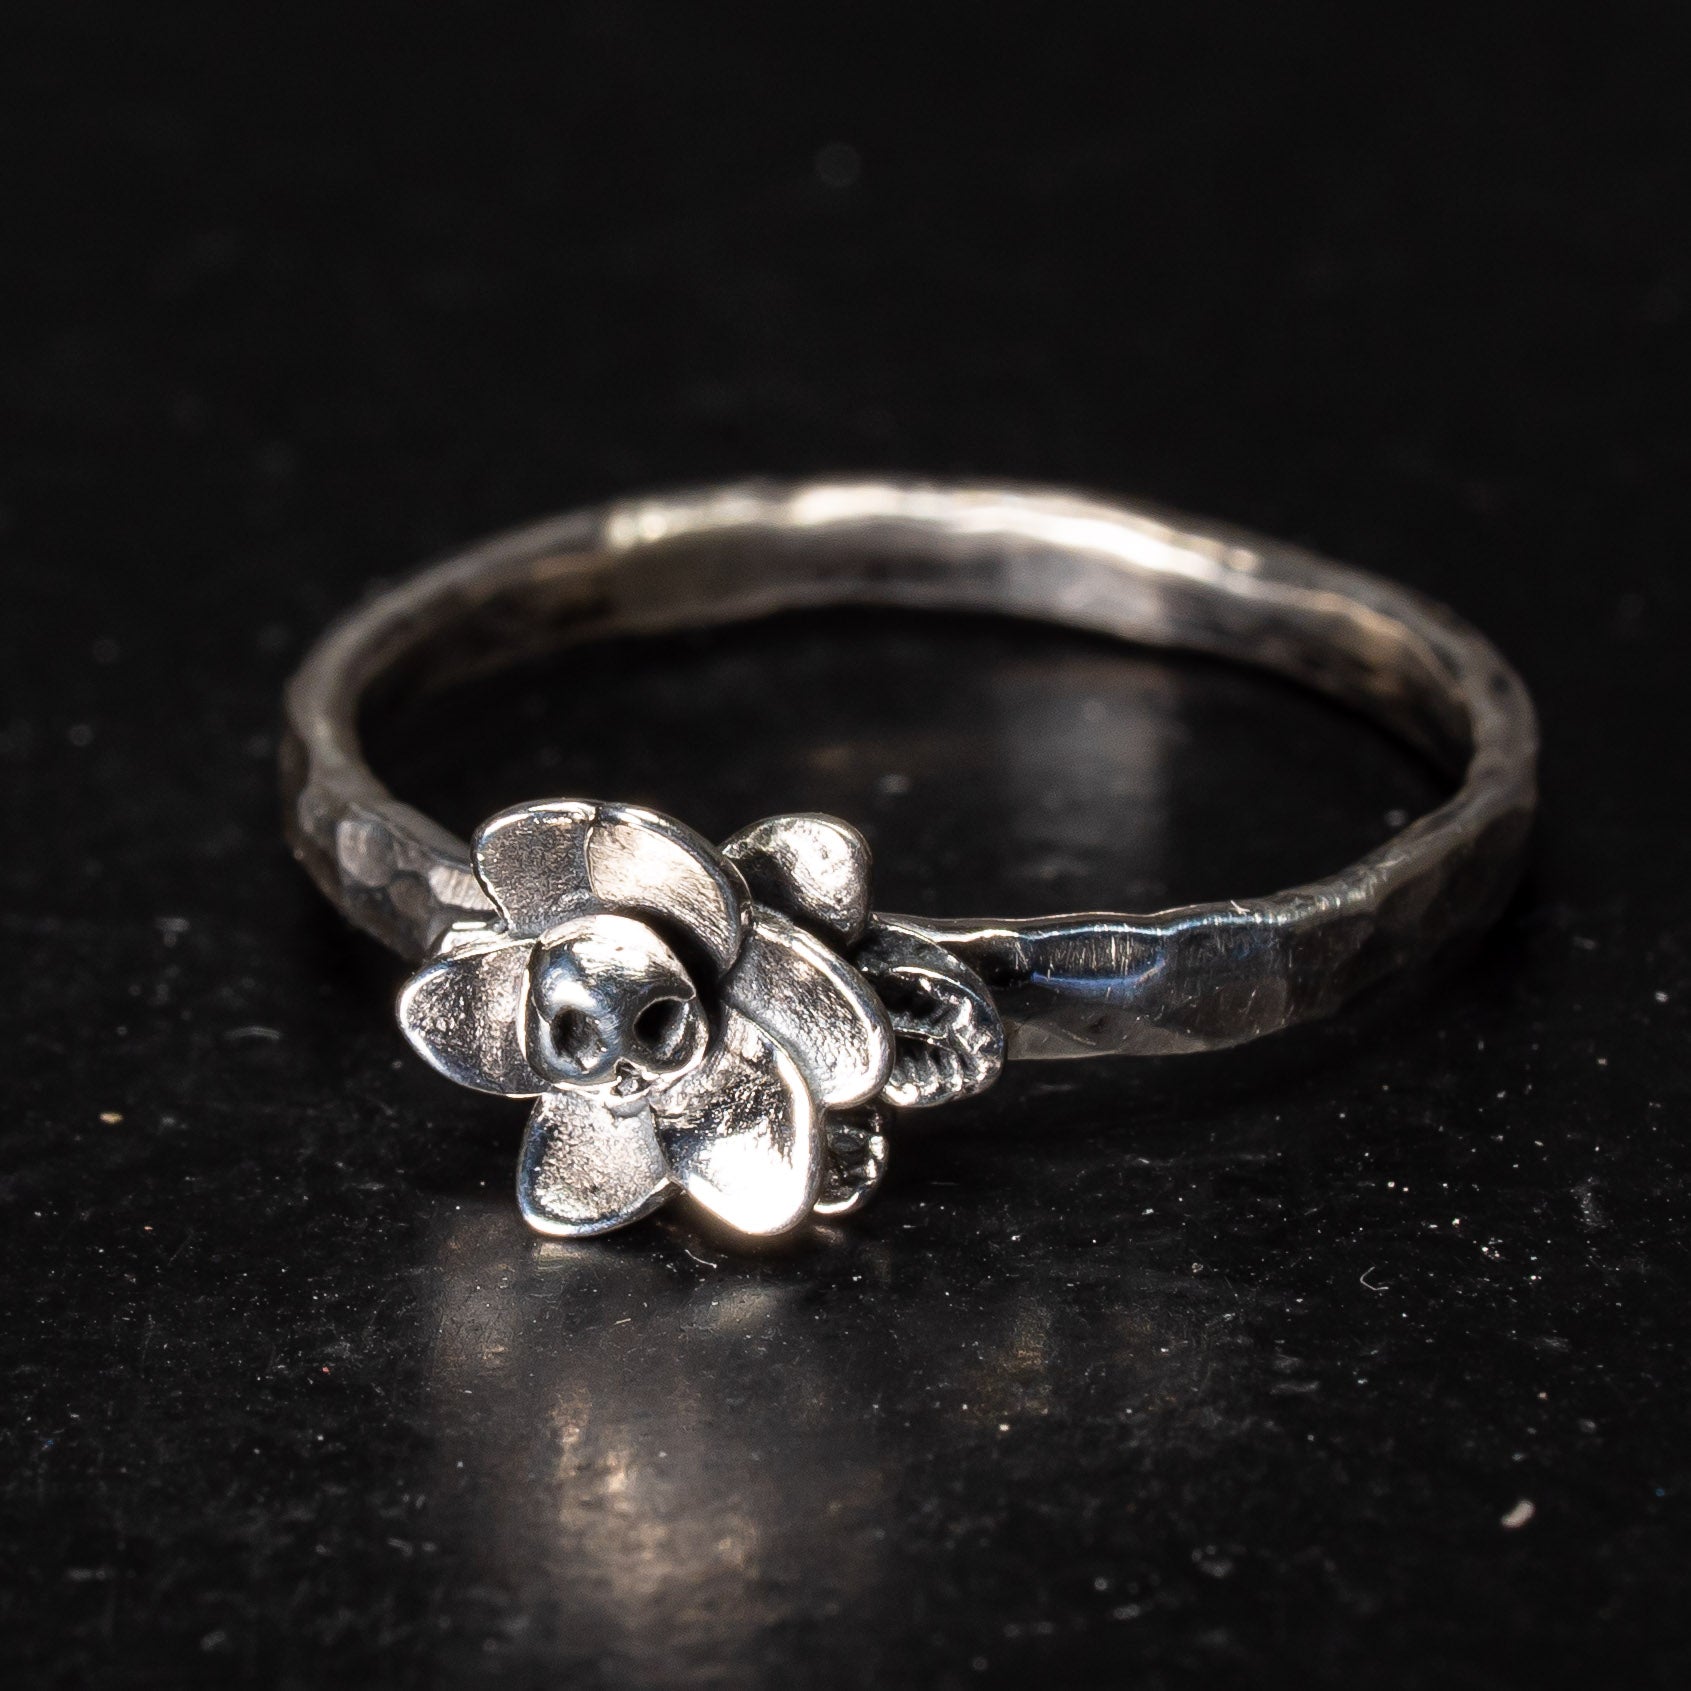 Silver Belladonna ring with skull detail